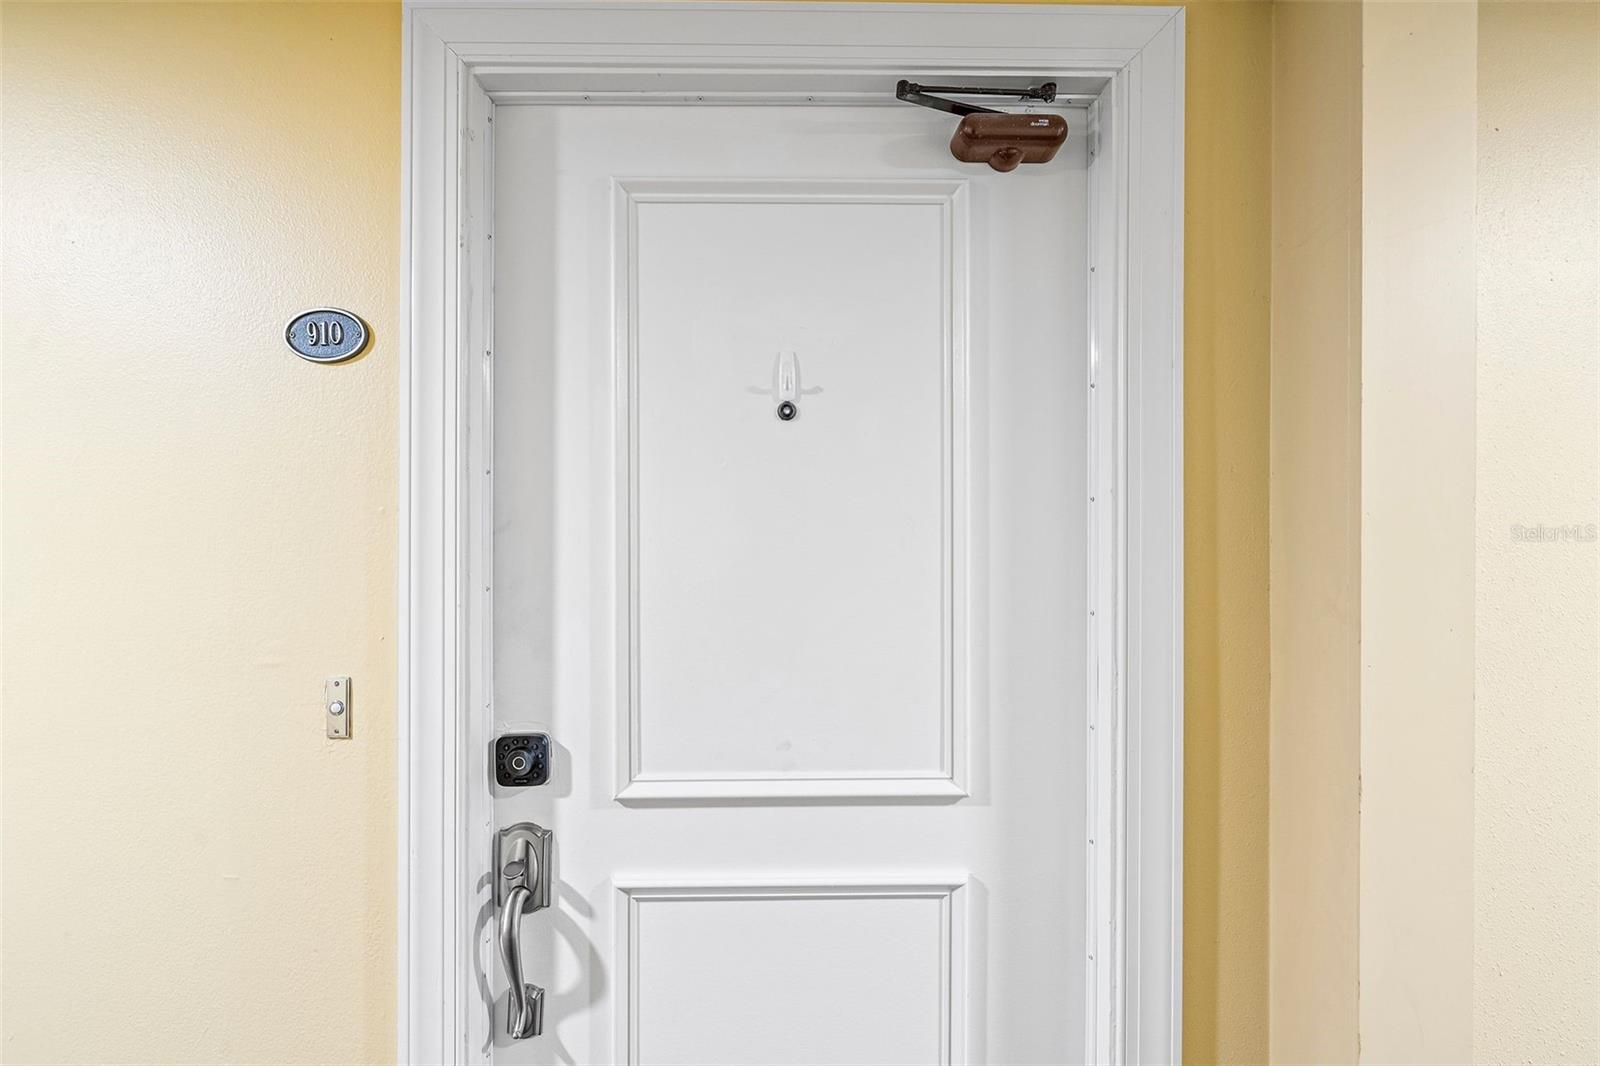 Prepare to be amazed as you open the door to your new home!